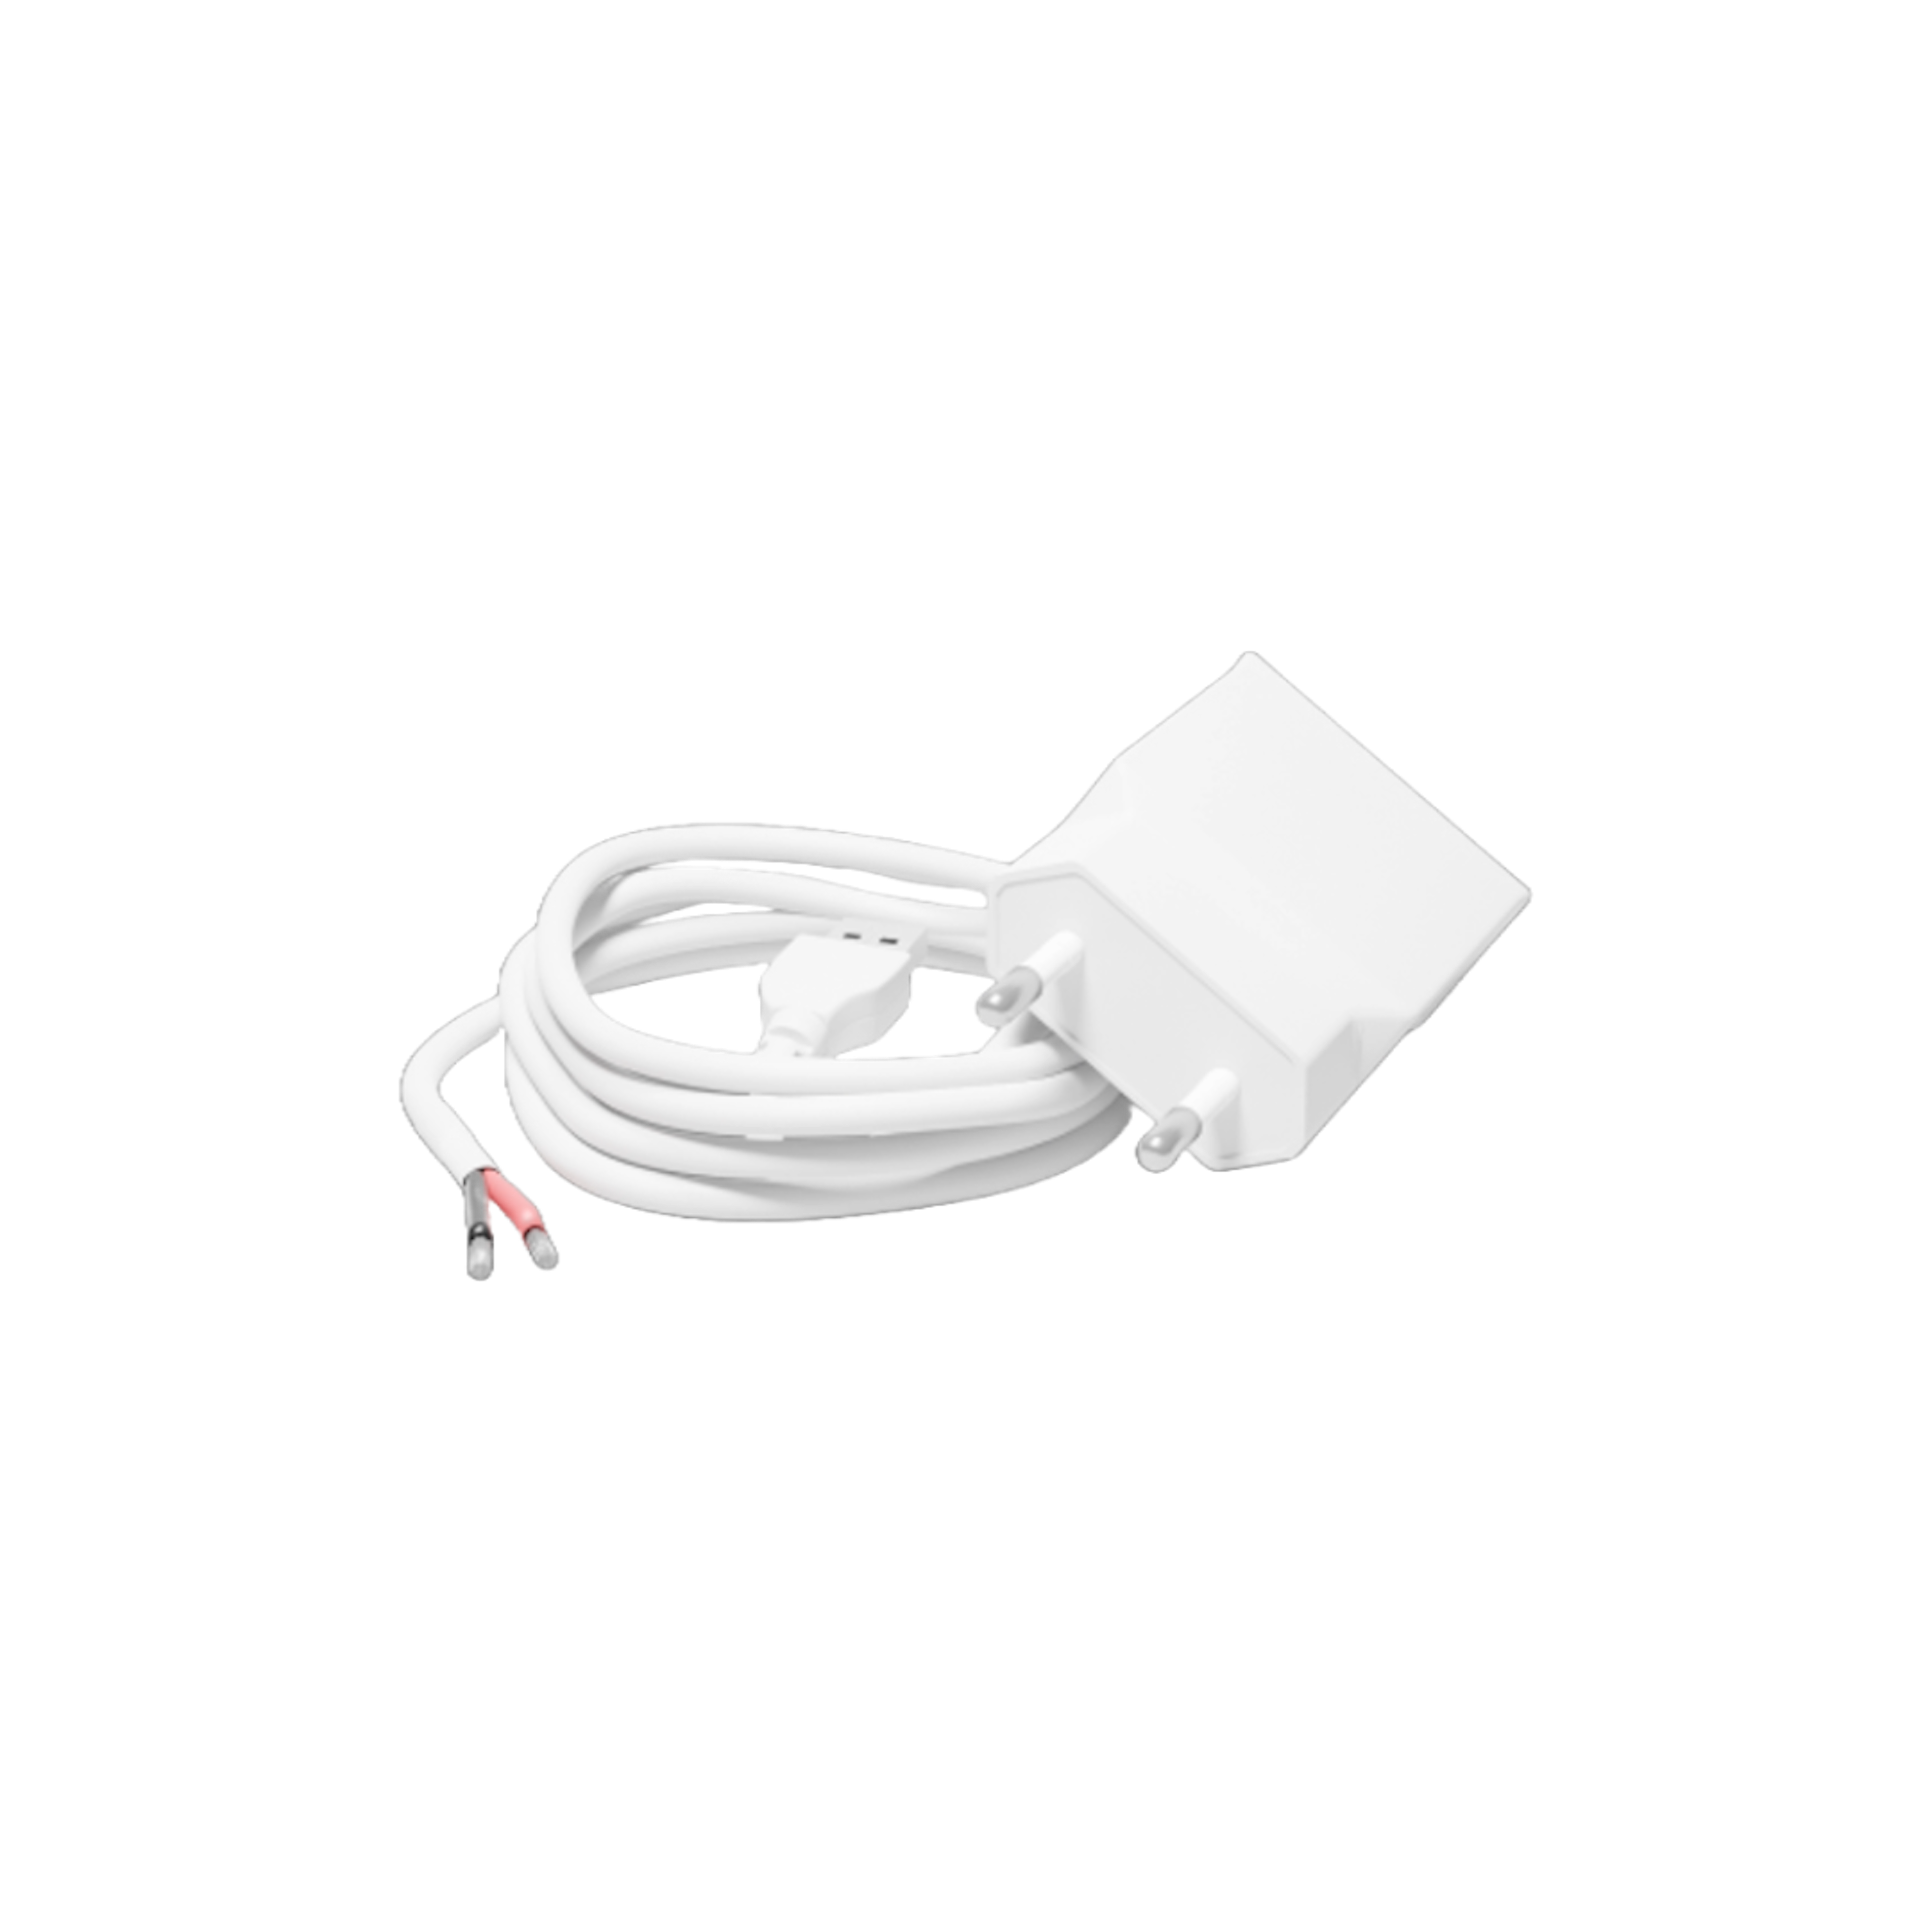 Enegic USB adapter with terminal cable